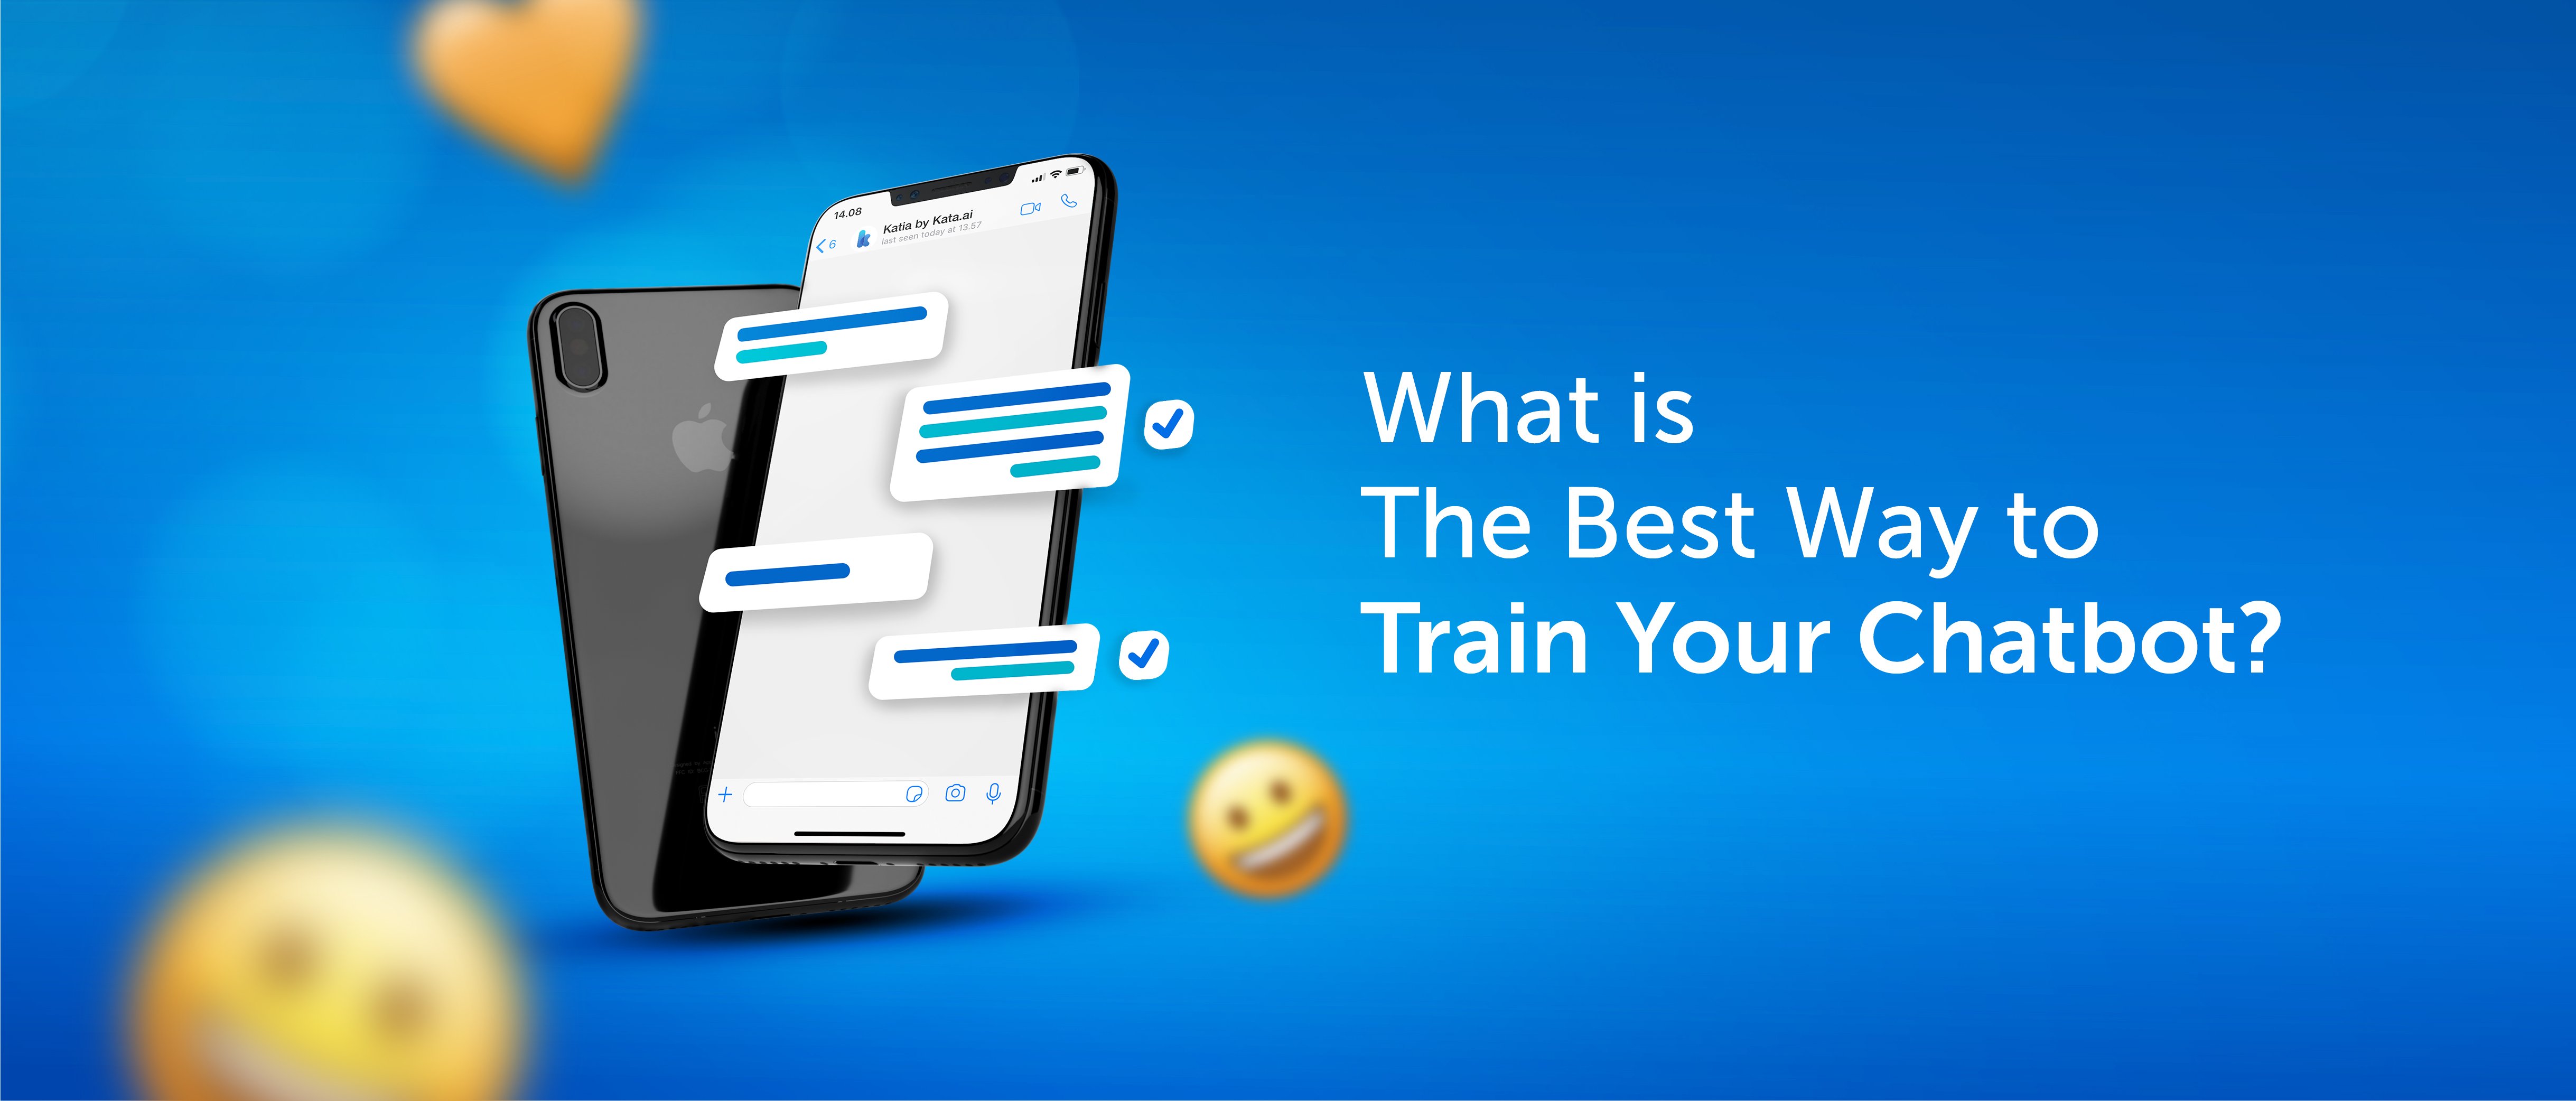 What is The Best Way to Train Your Chatbot?